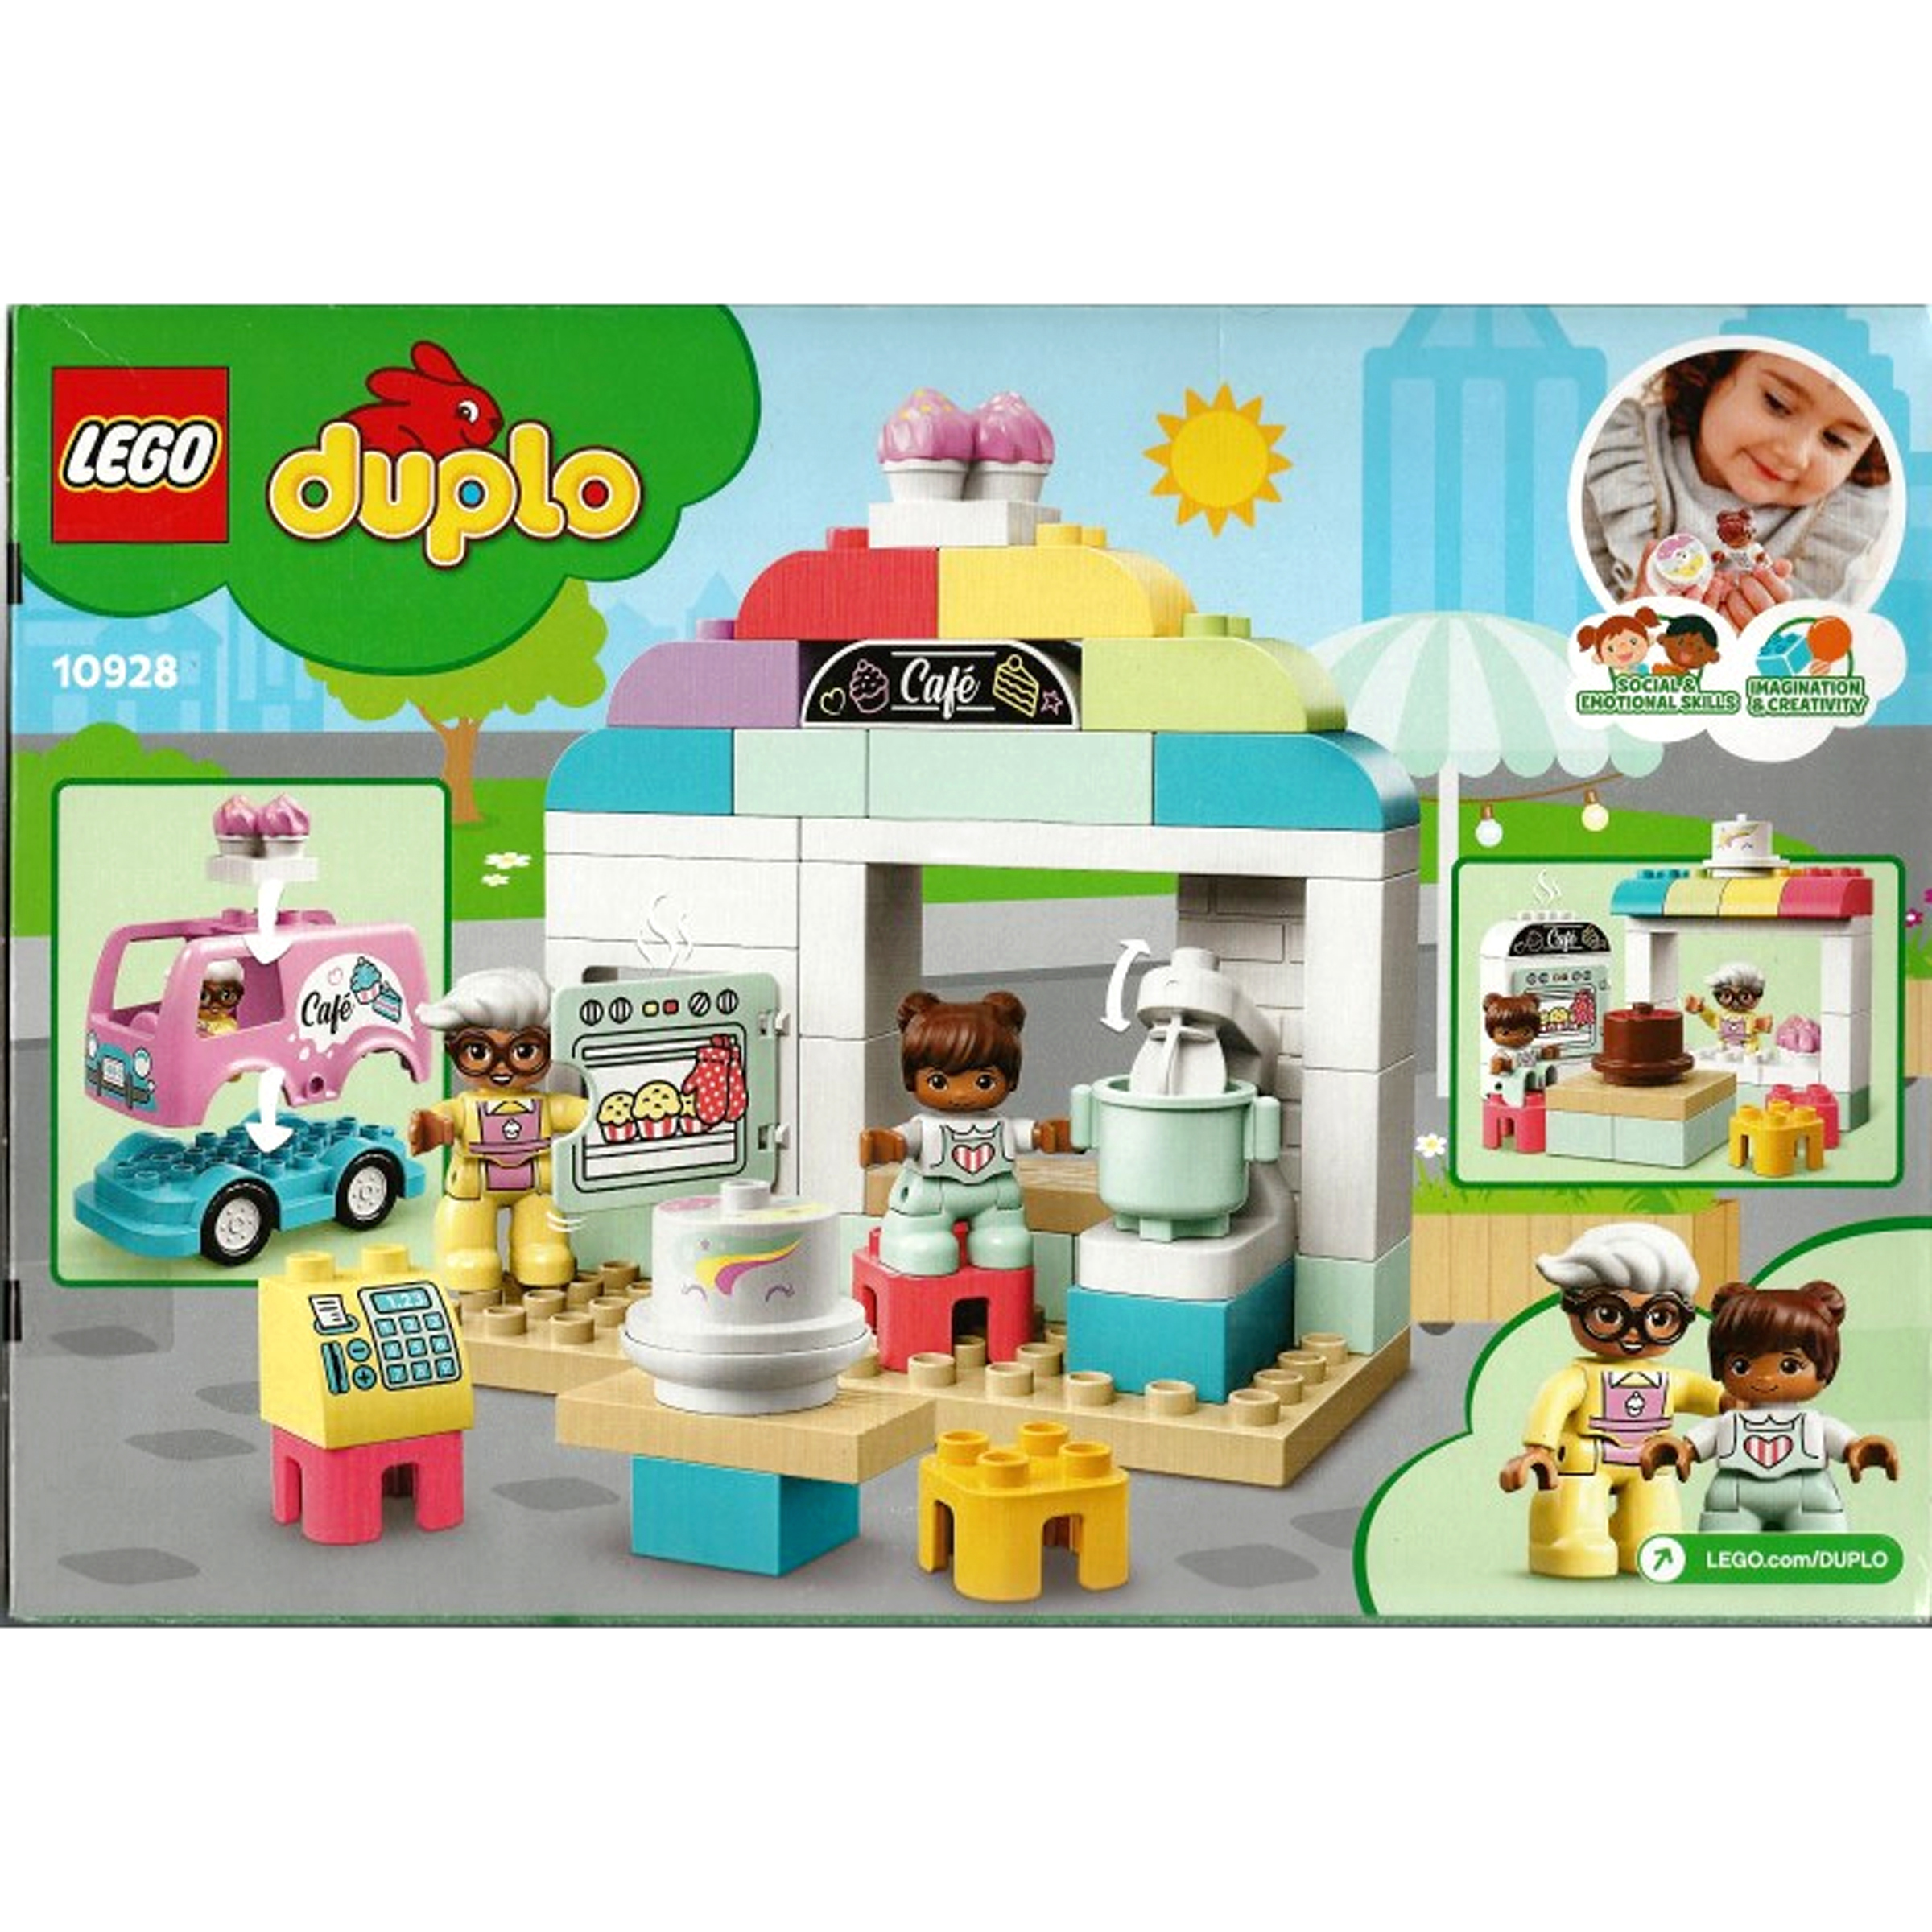 DUPLO - One Shop Store | New Toys For Kids & Babies in Pakistan